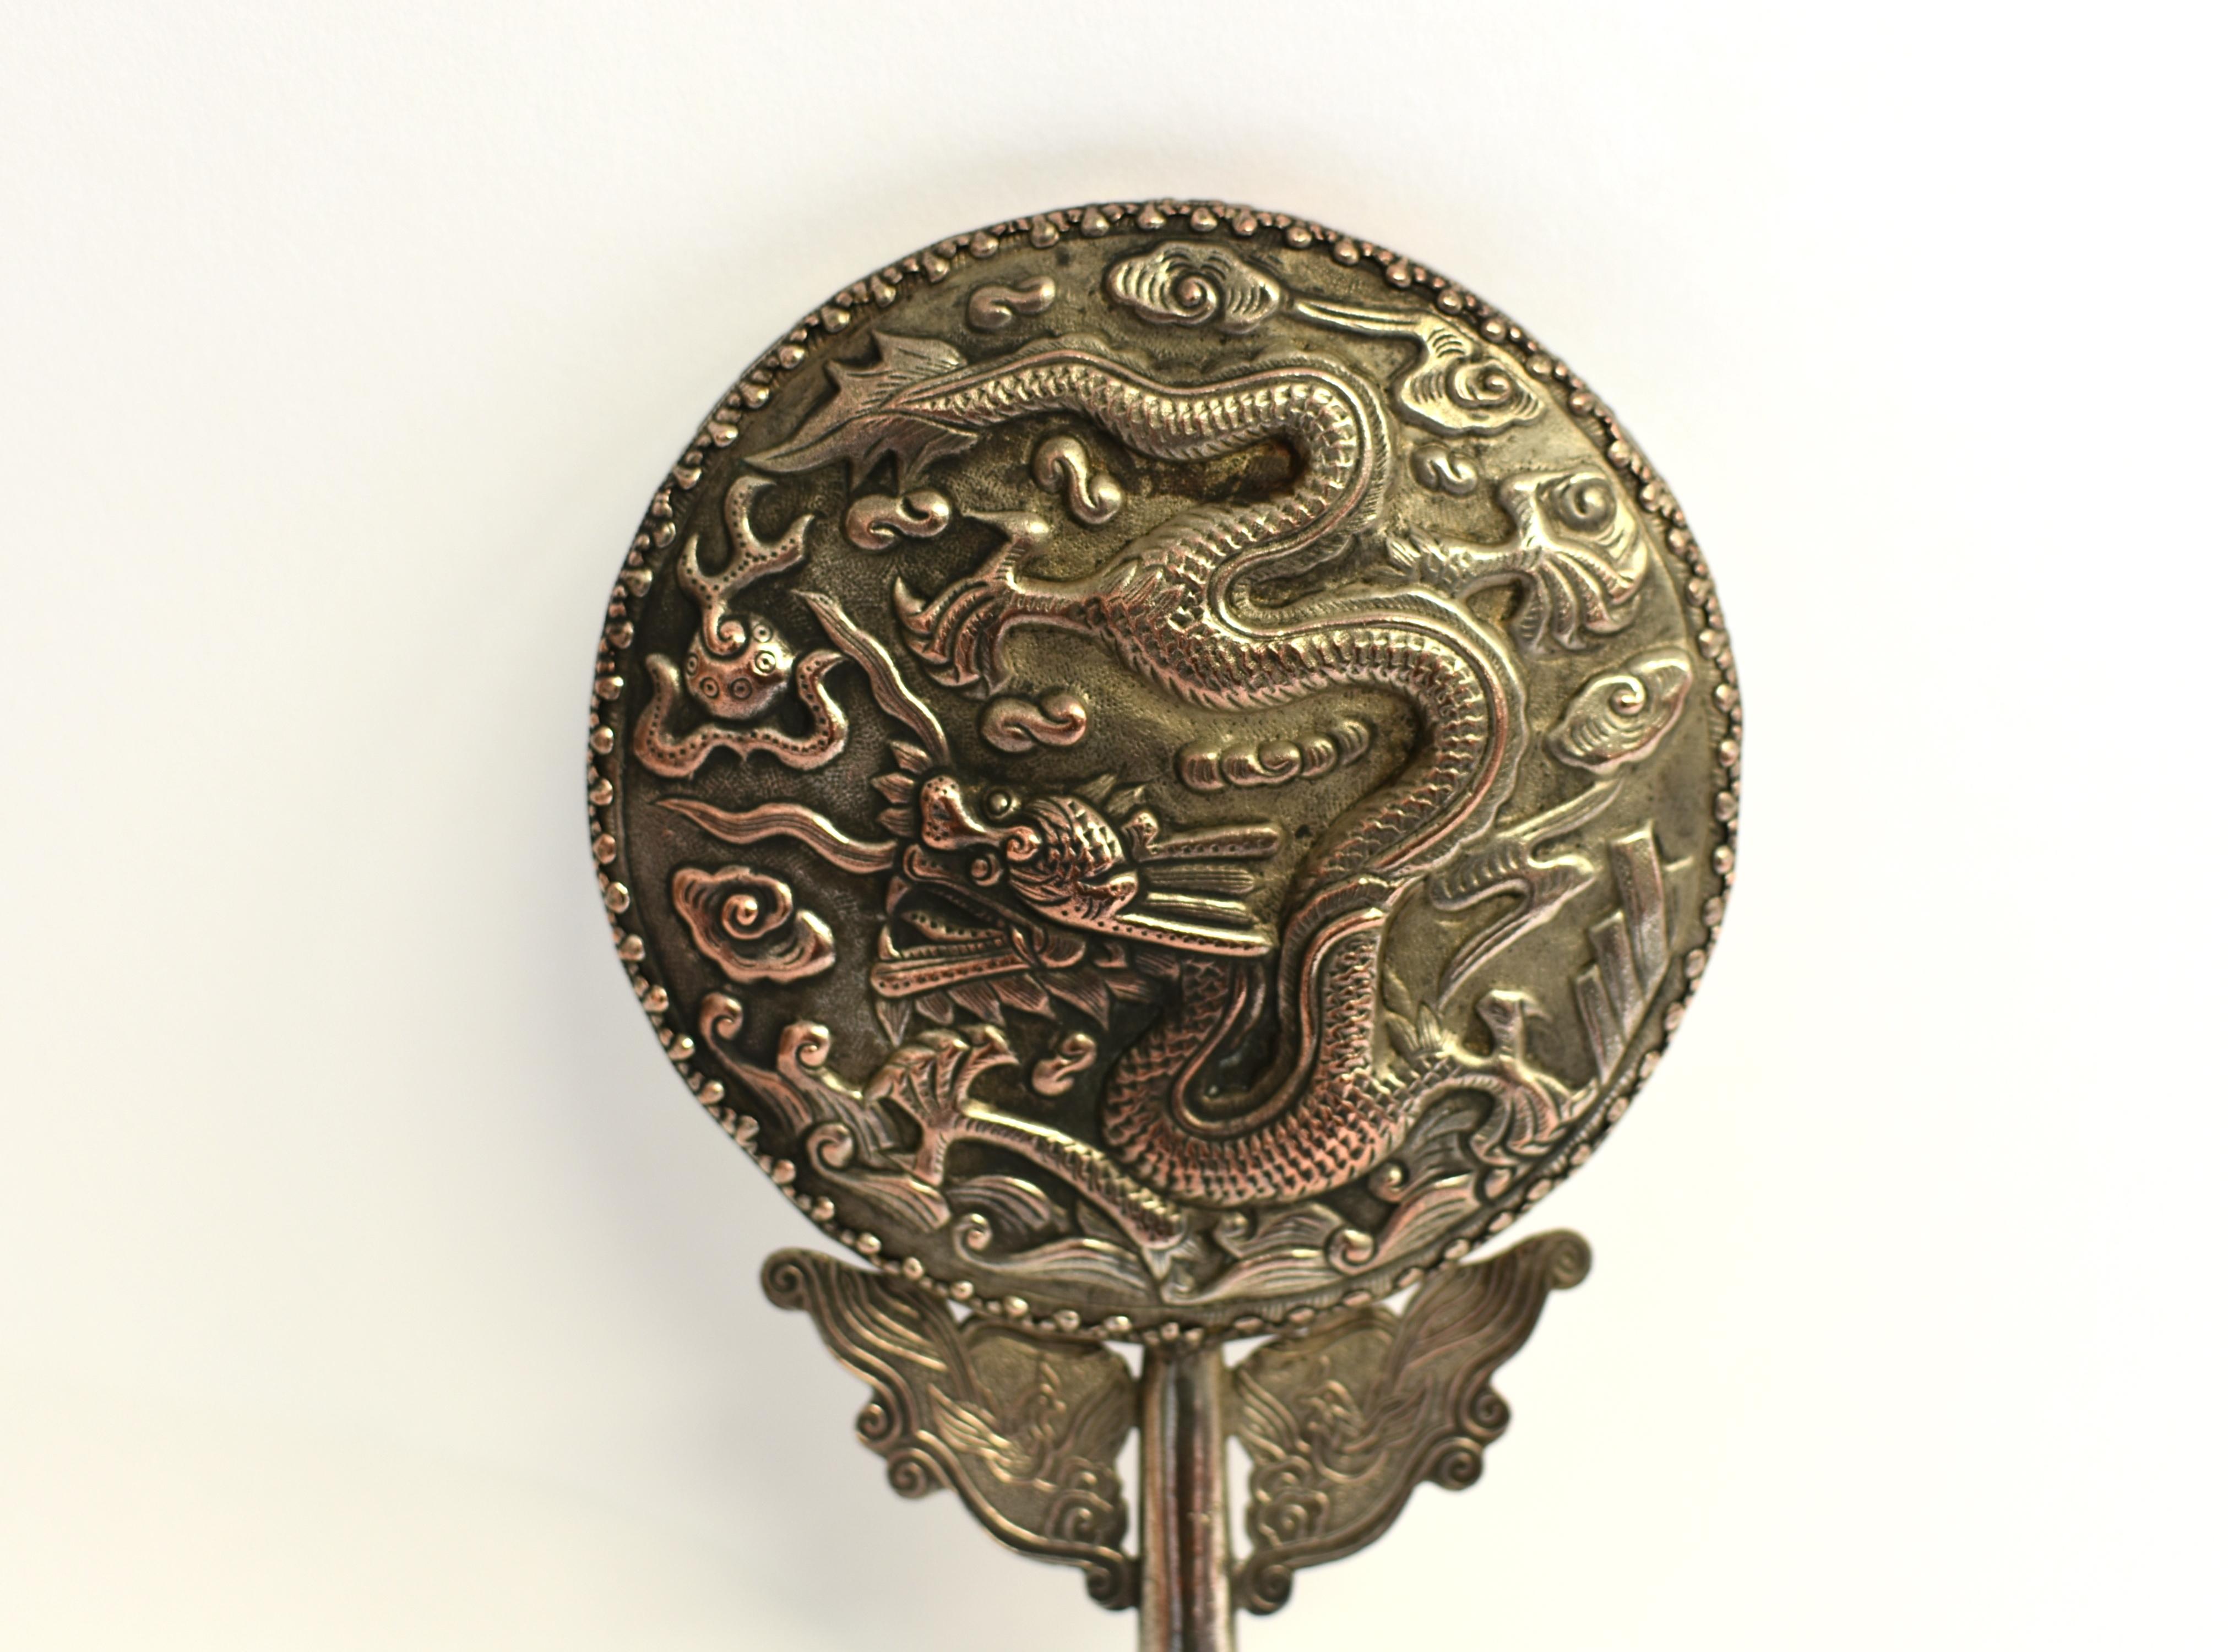 A beautiful hand held mirror with silvered metal depiction of dragon flying in the auspicious cloud above ocean waves. The dragon with curved body and fully opened talons chasing a fire ball, mouth wide open and eyes bulging, all conveying power and